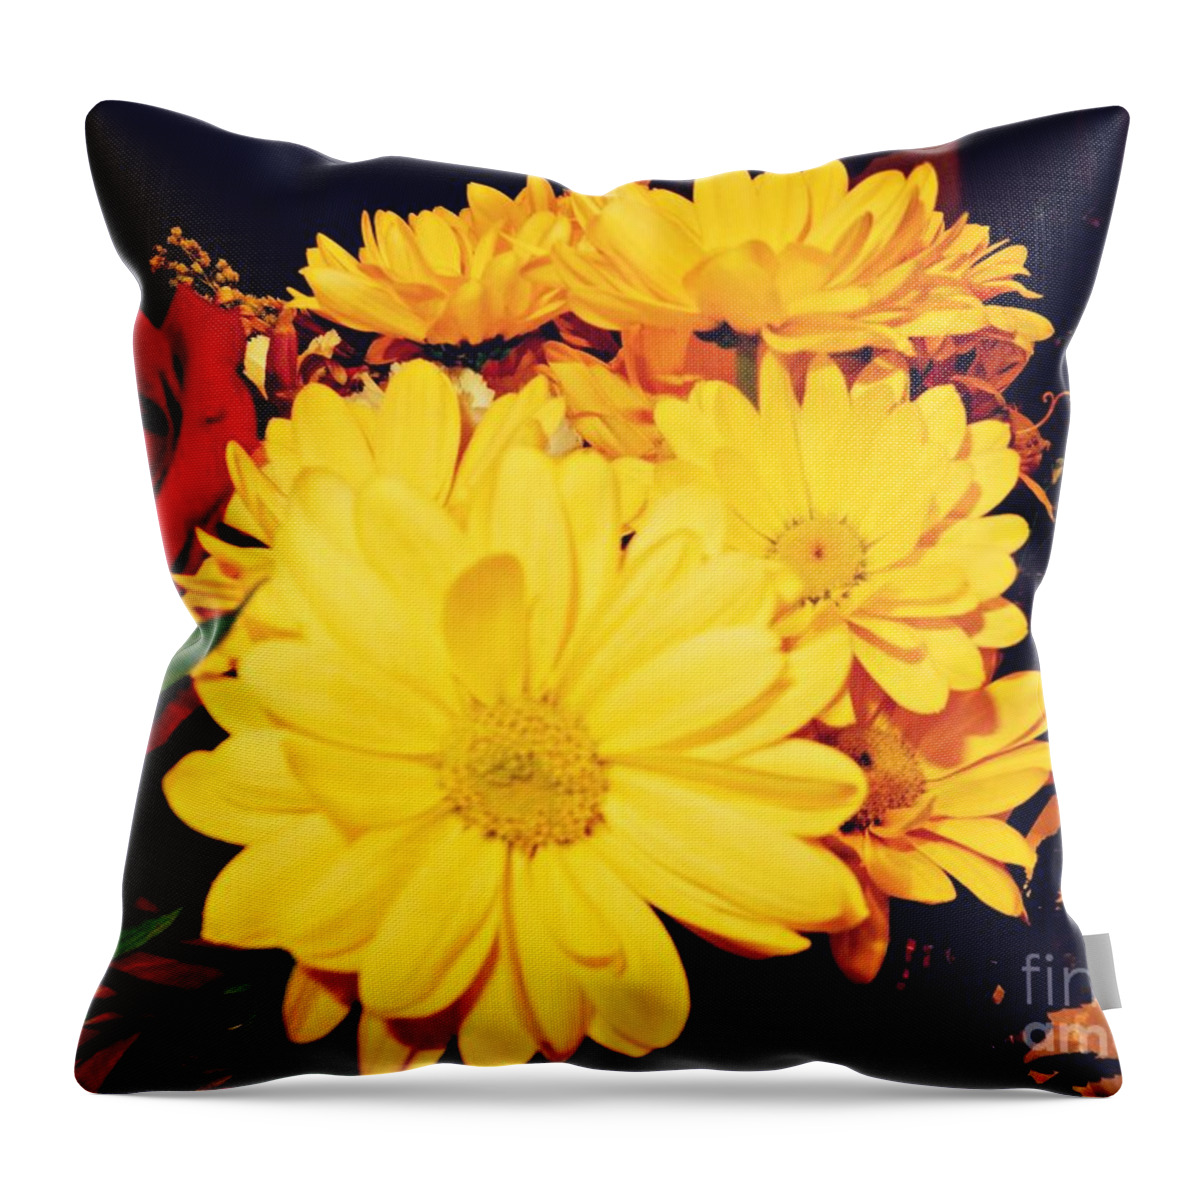 Flowers Throw Pillow featuring the photograph Flowers For My Baby by Diamante Lavendar